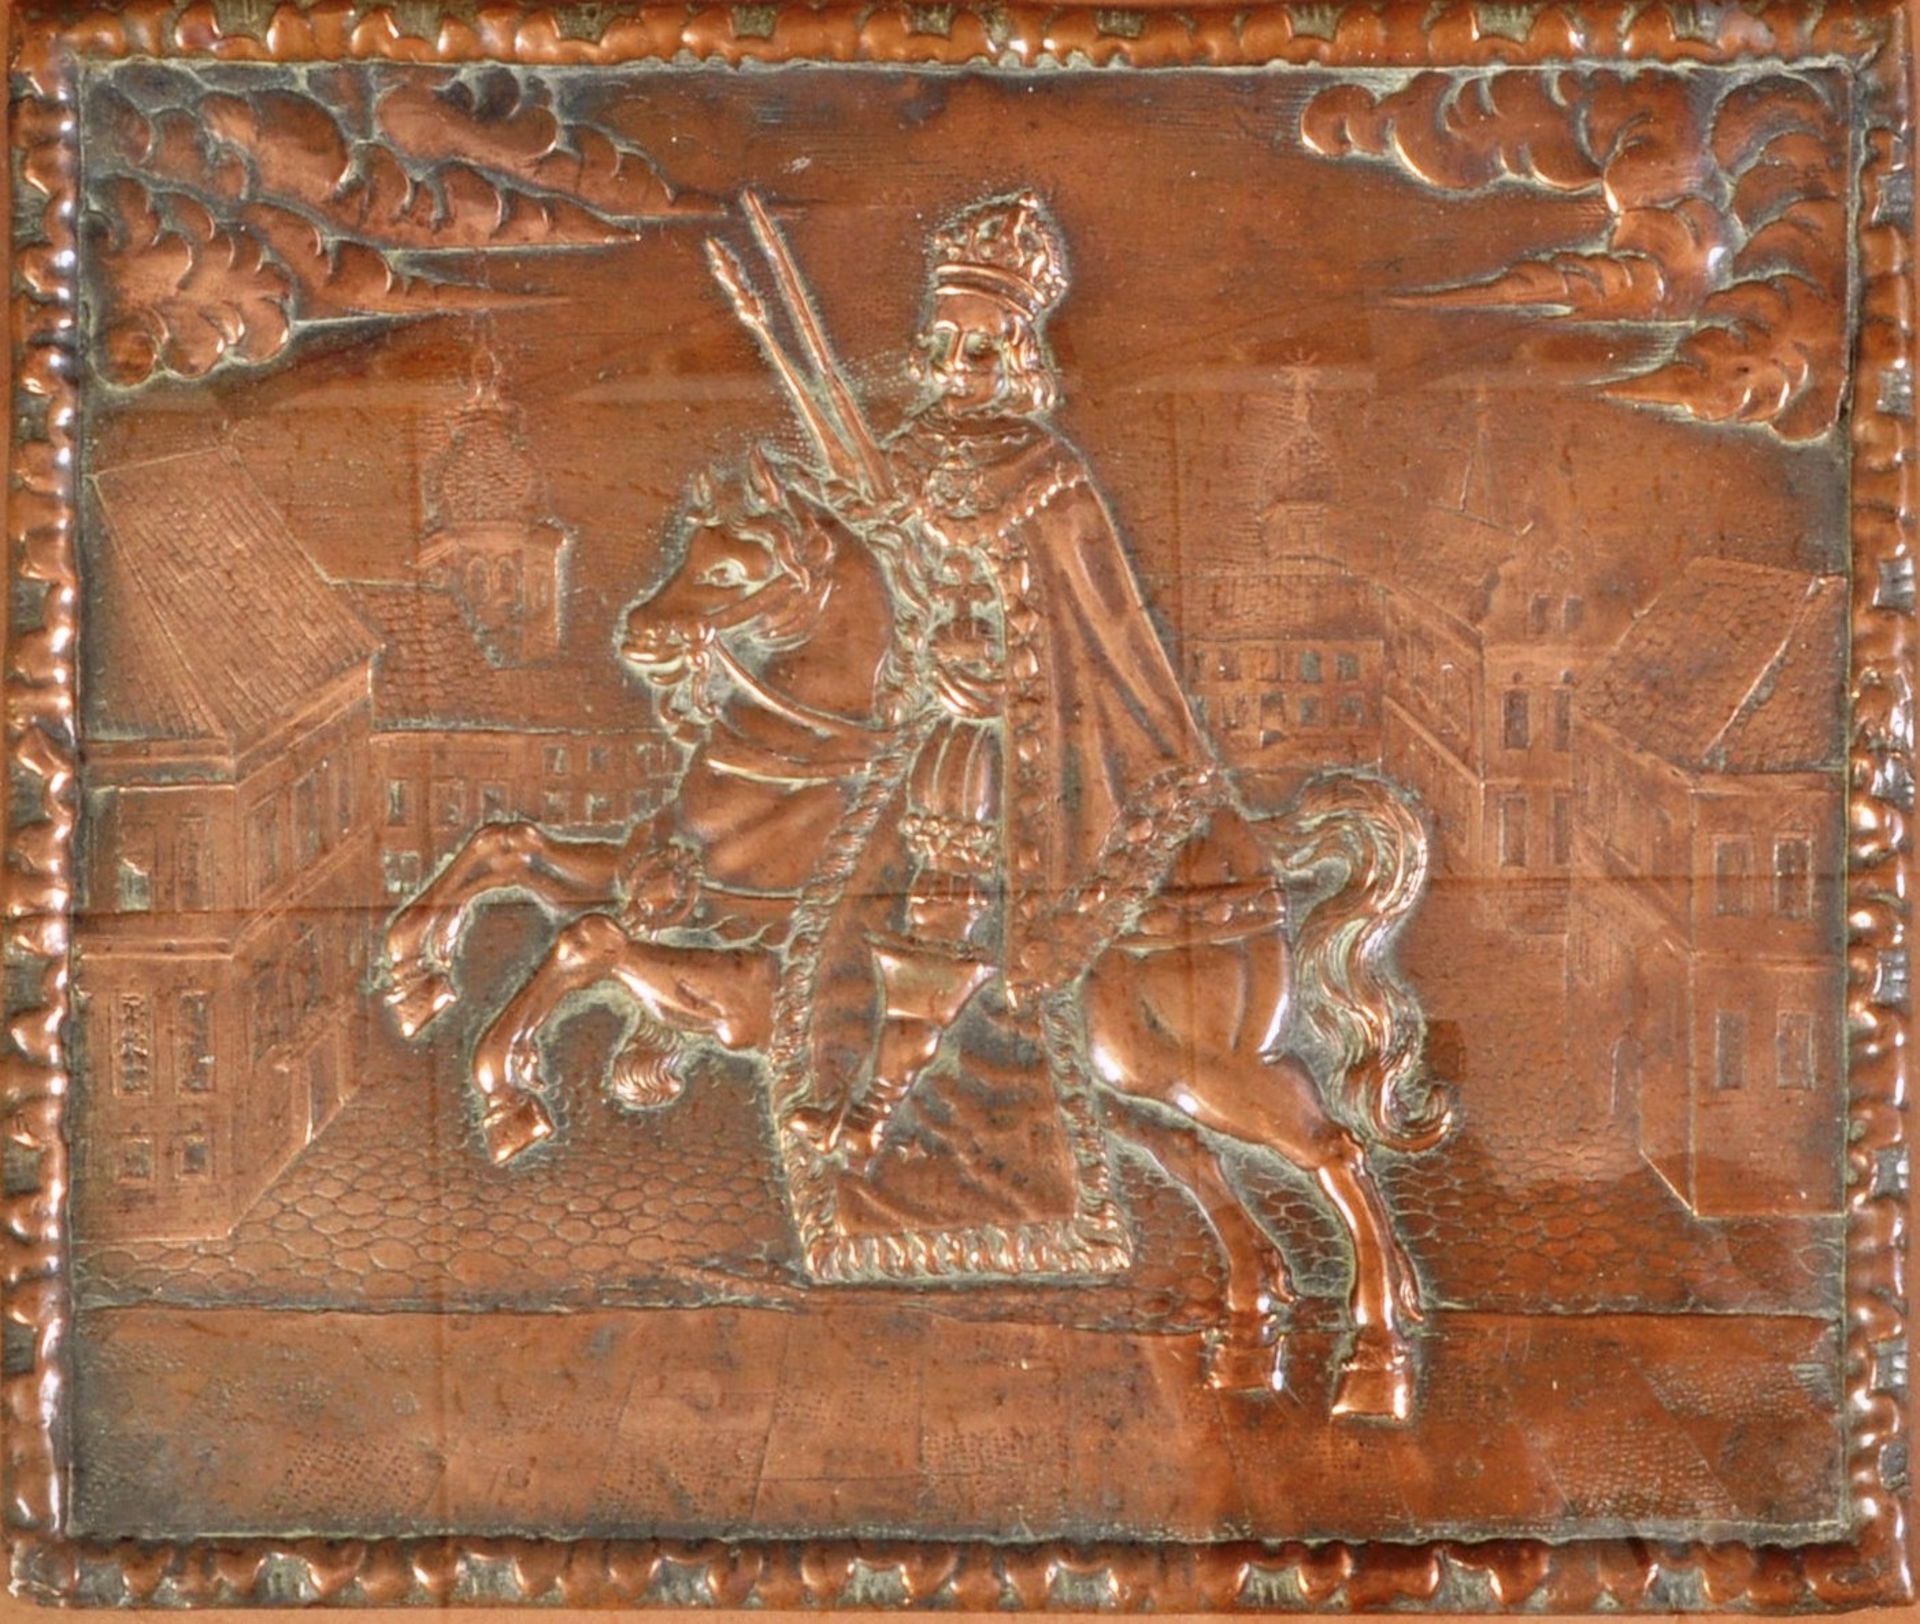 18TH CENTURY FRAMED COPPER PLAQUE DEPICTING KING CHARLES I - Image 2 of 5